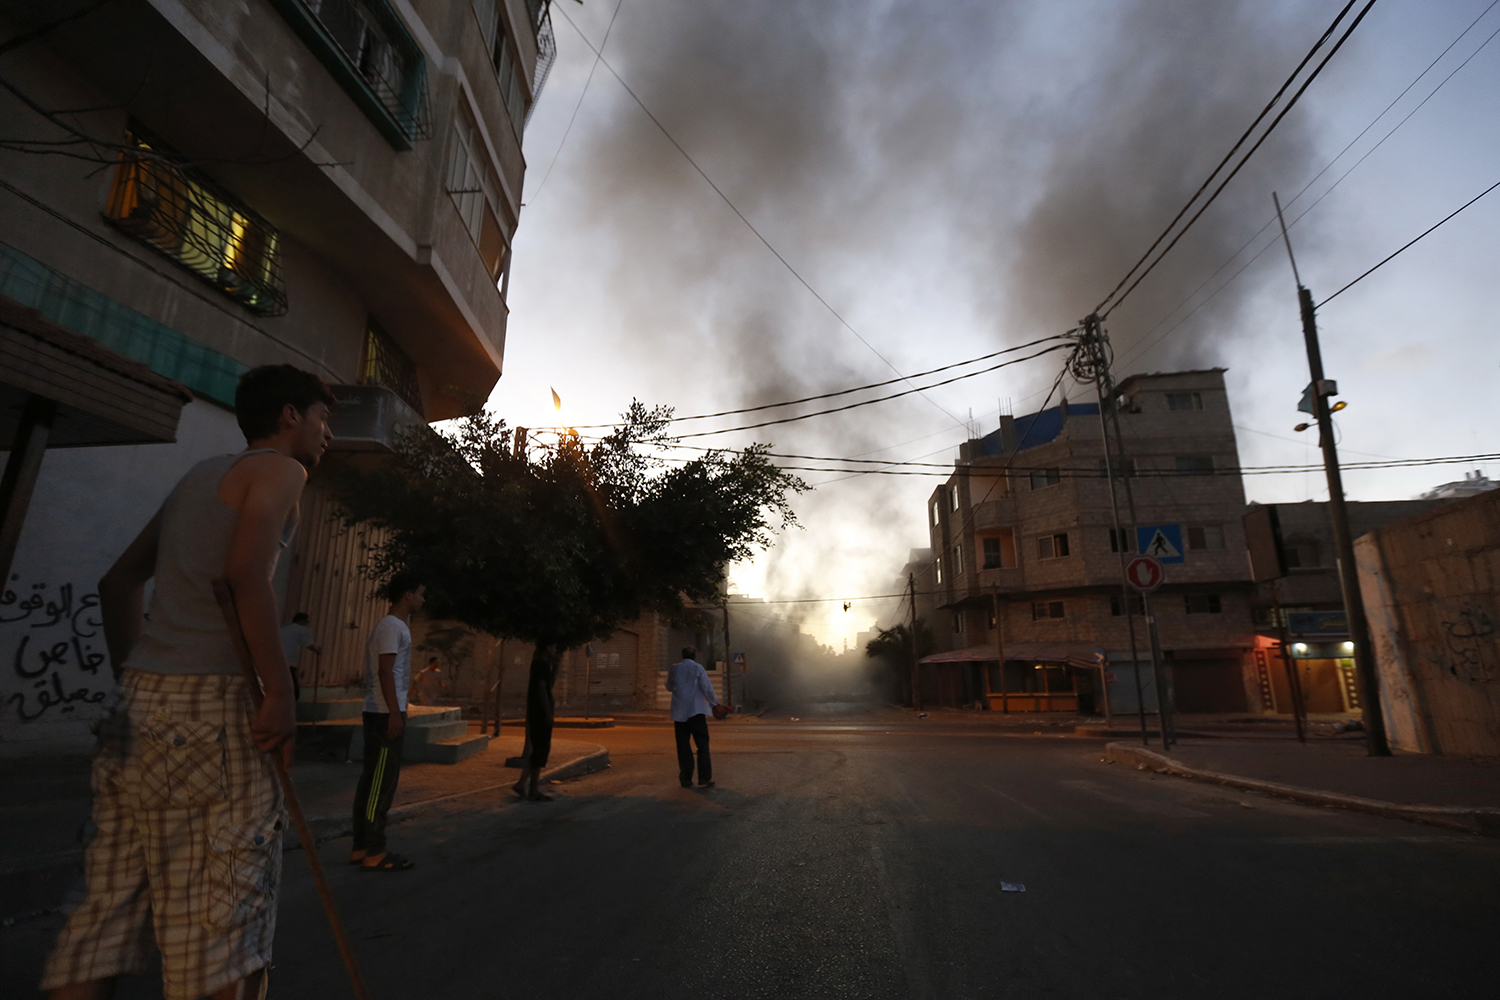 Palestinians stand looking at smoke billowing from a nearby building hit by an Israeli air strike in Gaza City on July 13, 2014. Photo: Getty Images